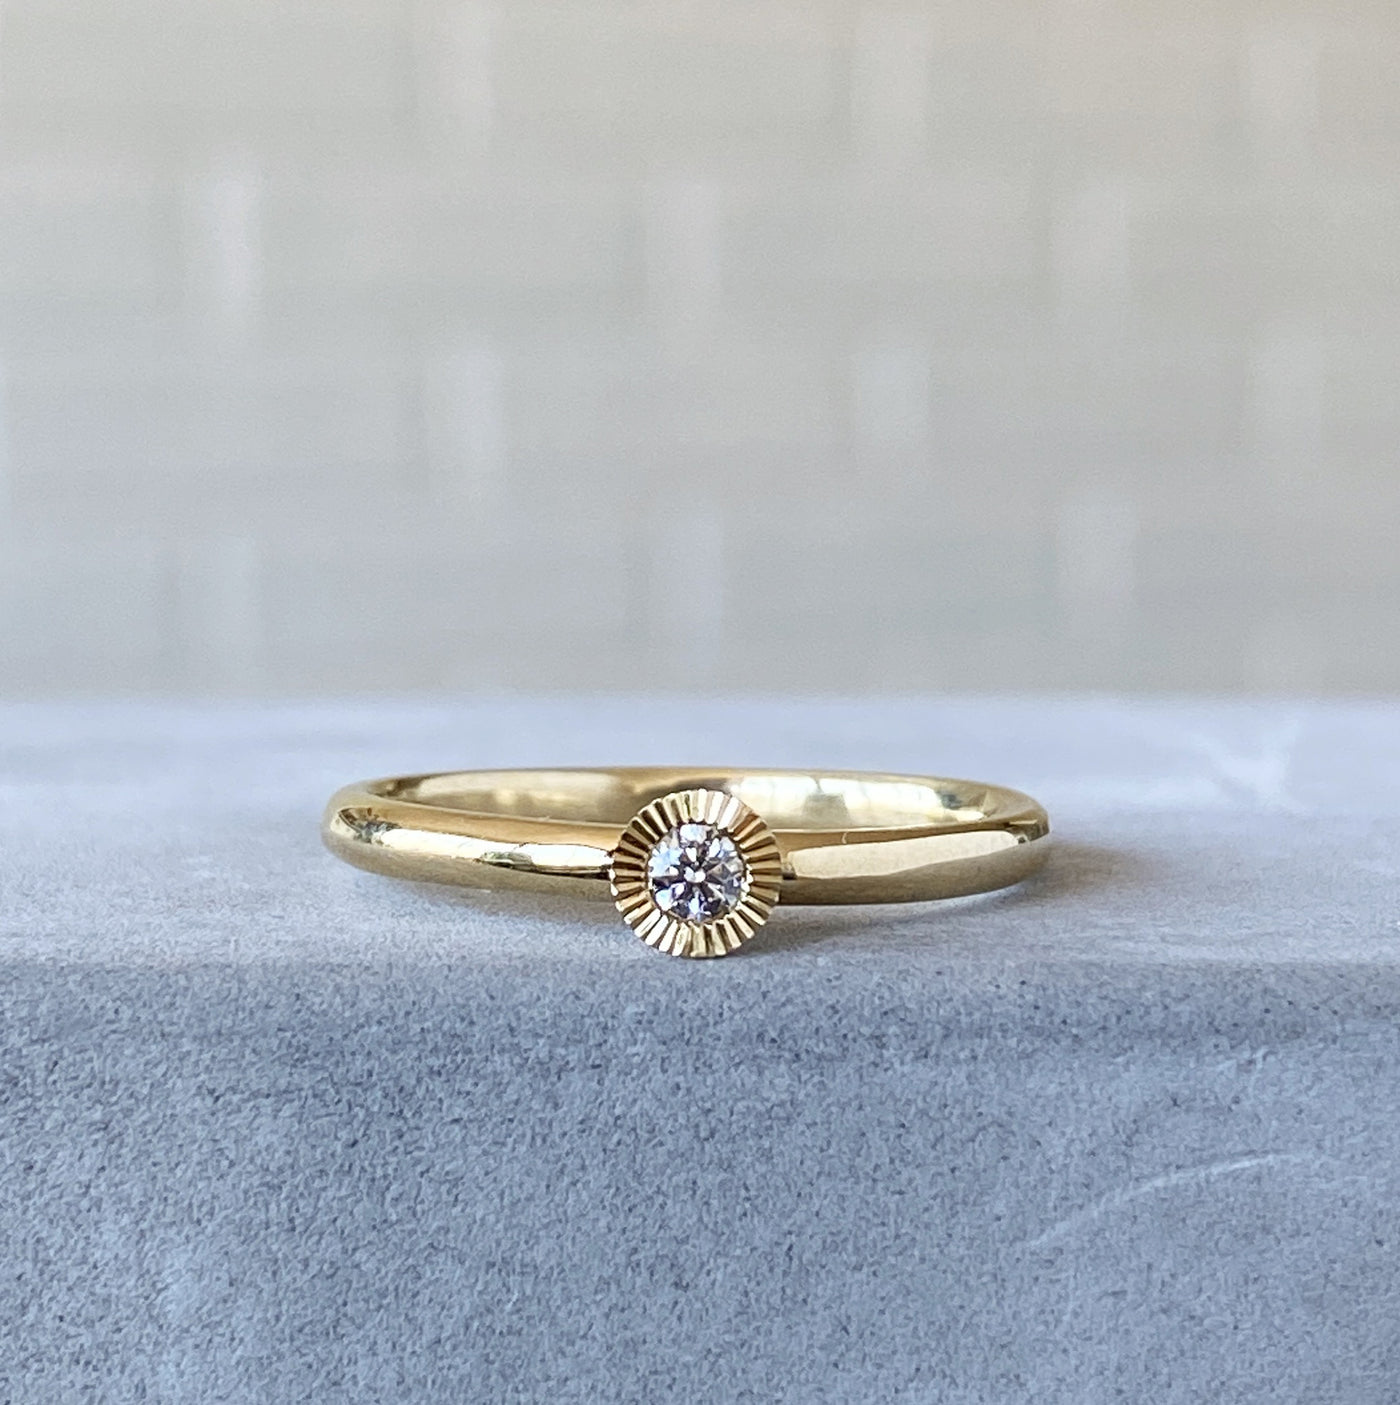 14k yellow gold medium aurora stacking ring with a 2.5mm center diamond and engraved border on a hand